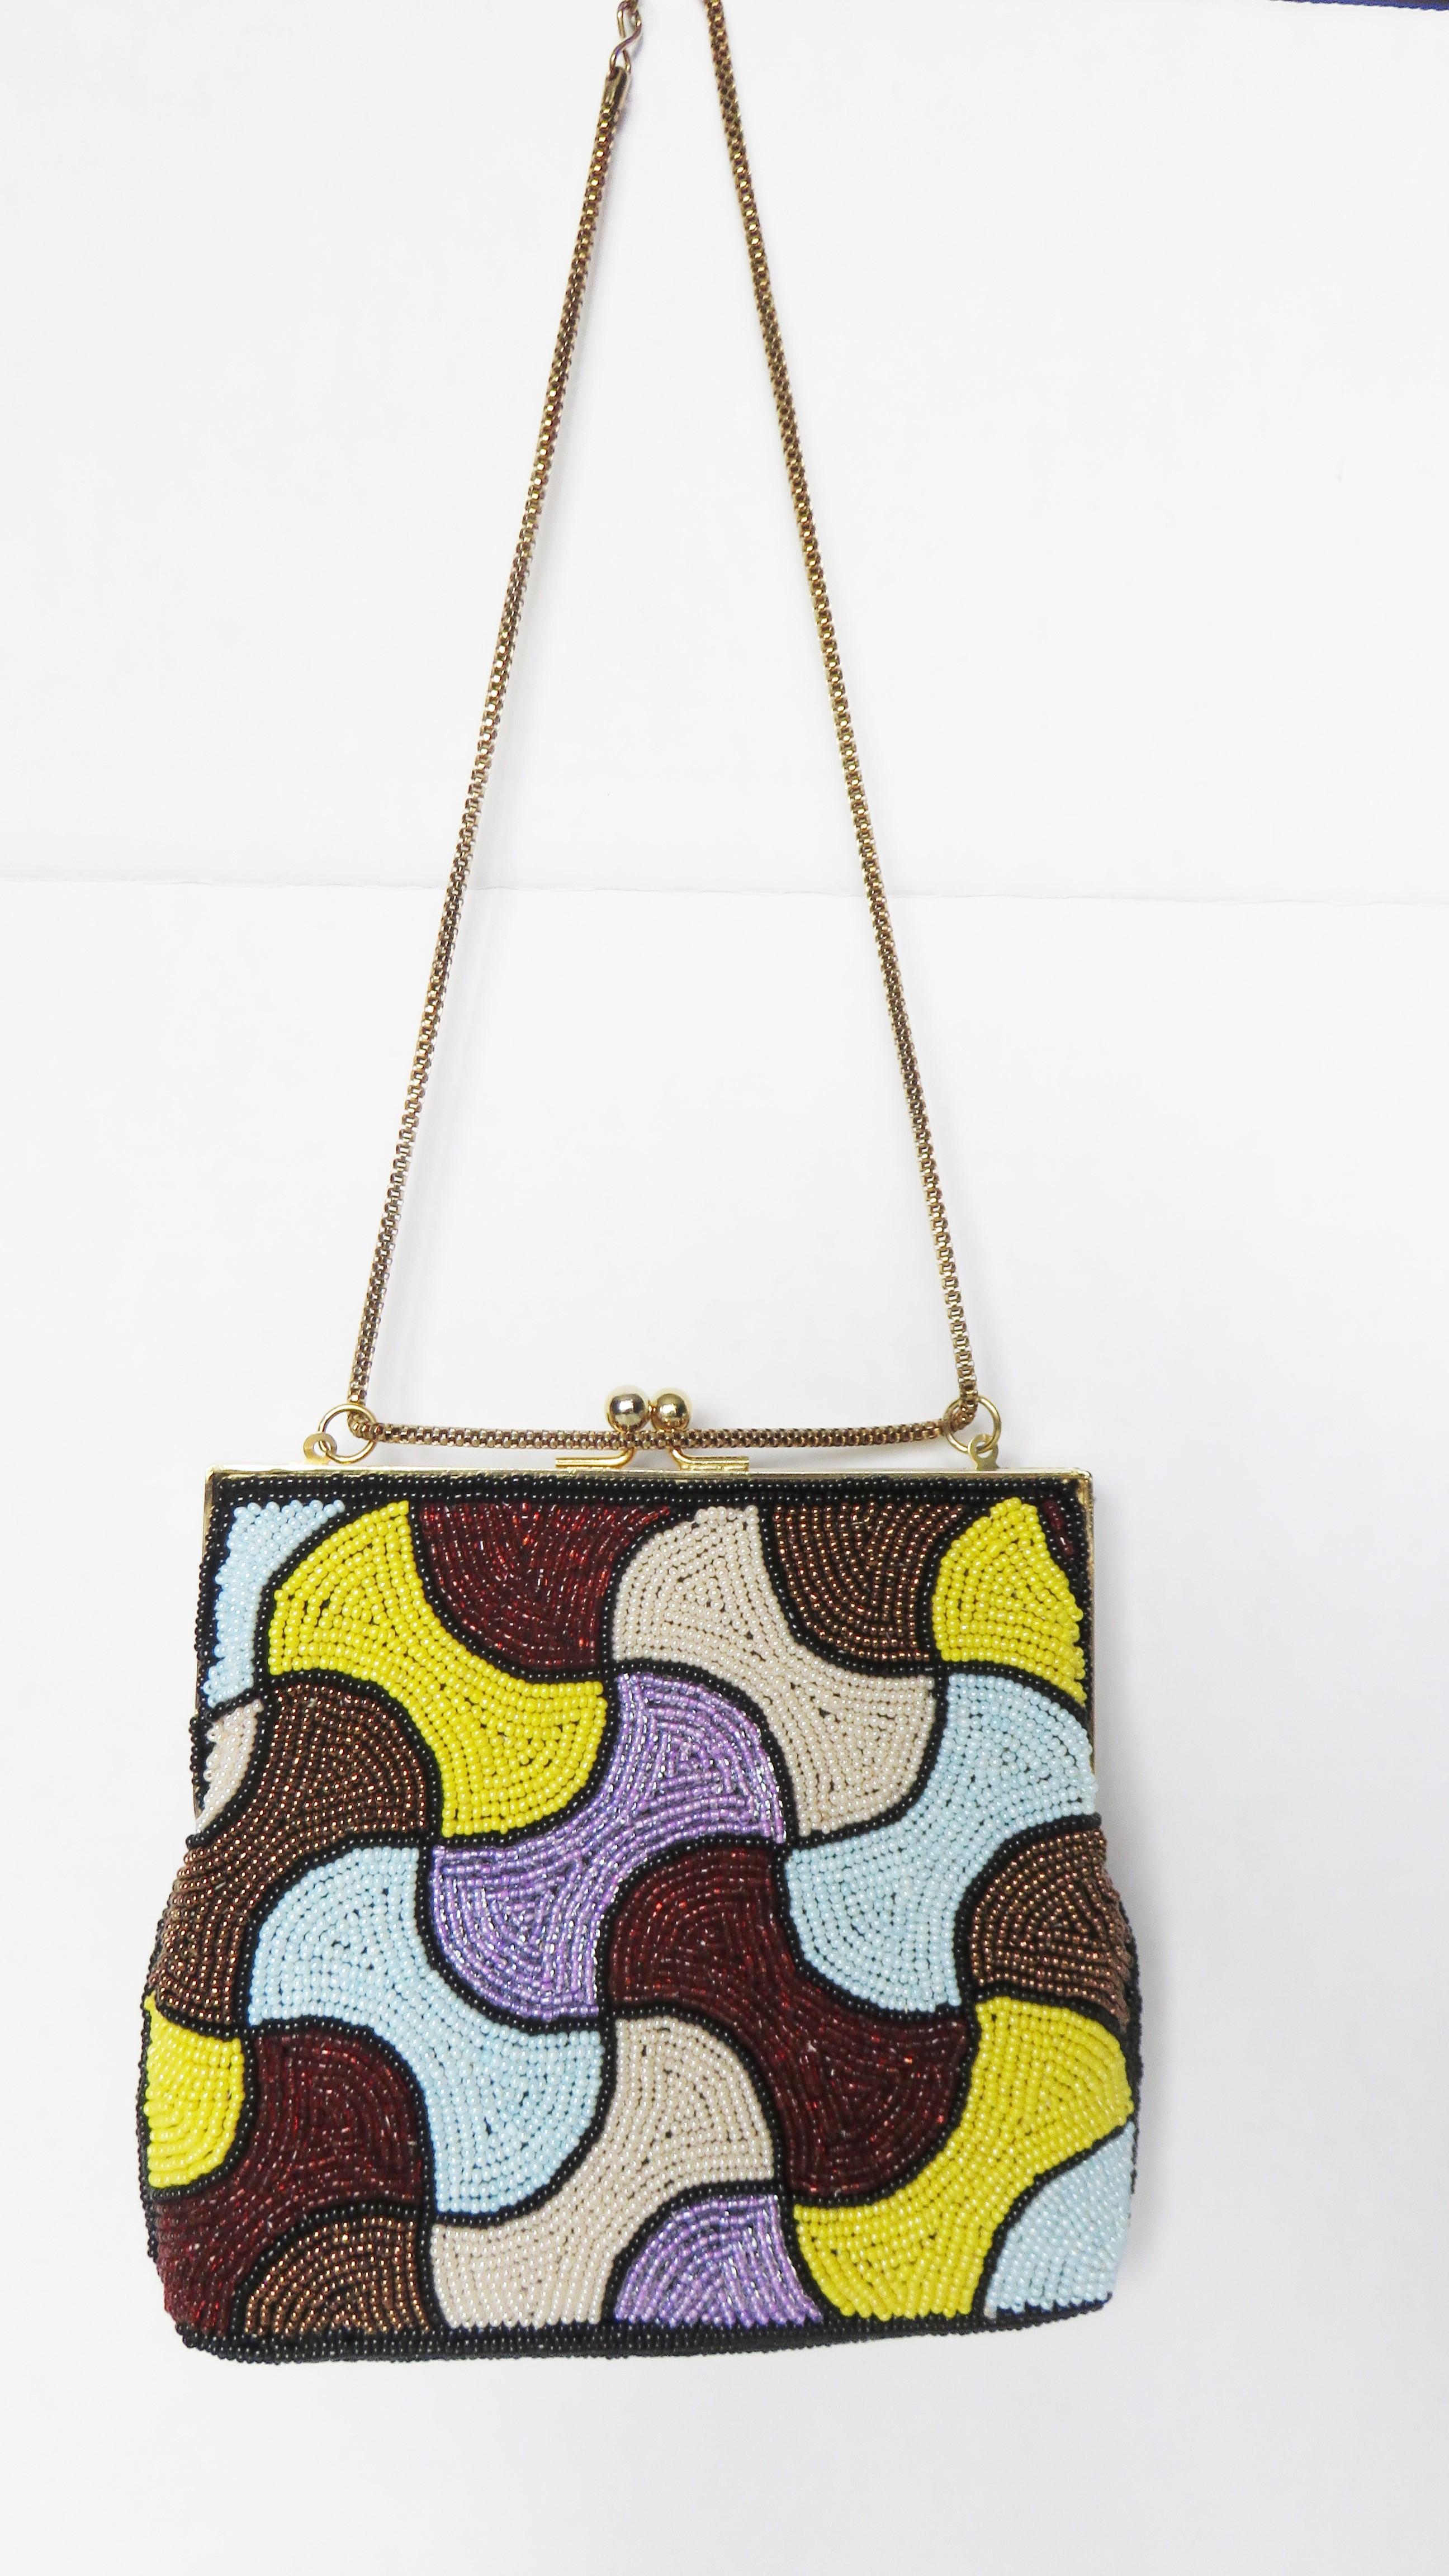 A fabulous brightly colored handbag in a lilac, burgundy, light blue, yellow and bronze glass beaded abstract pattern on both sides. It has a top gold metal ball clasp and frame plus a mesh snake chain top handle which can be worn on the shoulder,